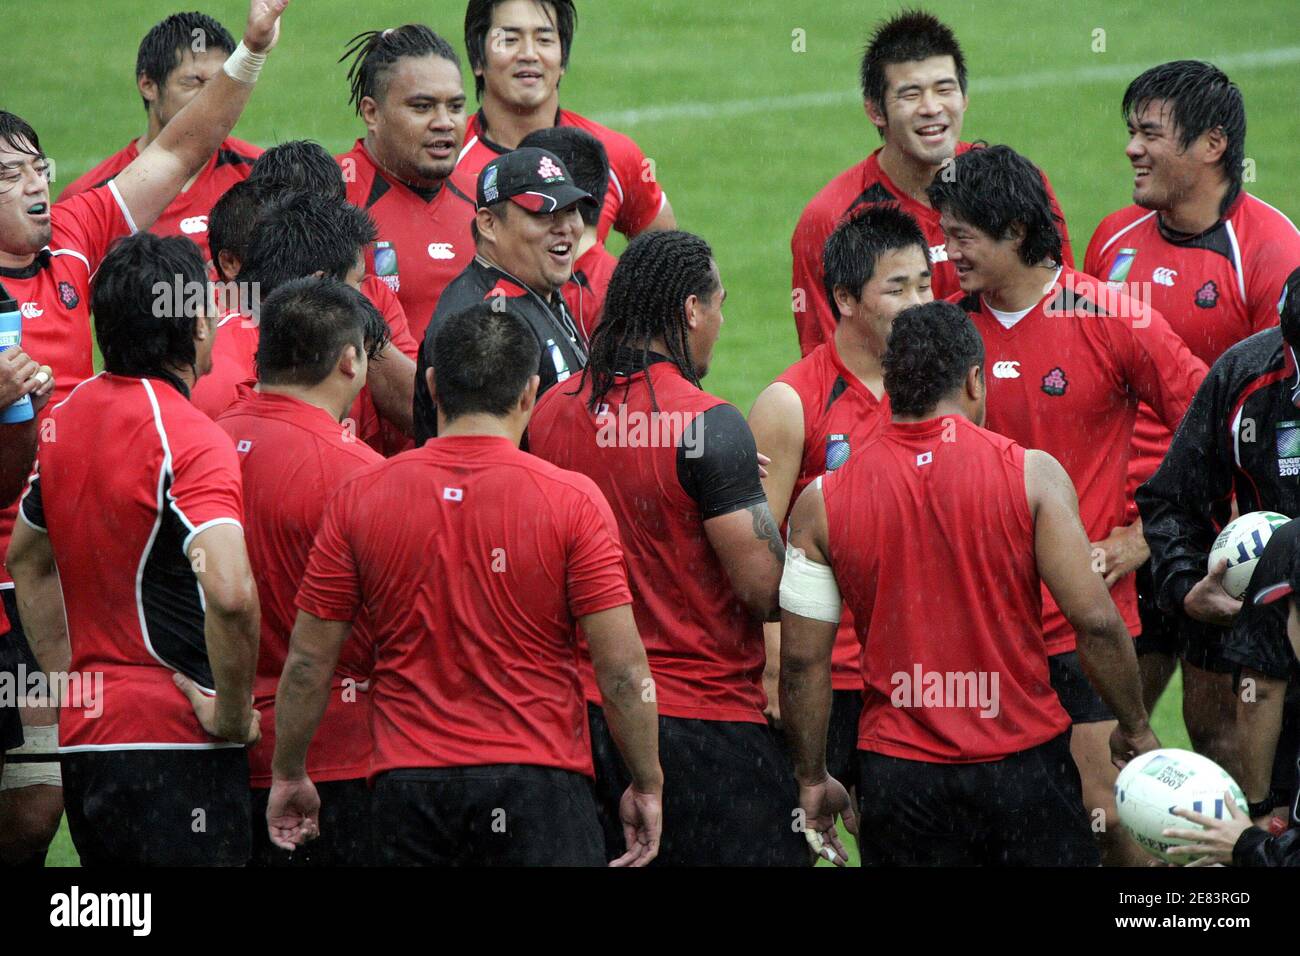 Japan rugby team players have a break during training session under the rain at stadium Michel Bendichou in Colomiers, southwestern France, September 14, 2007. Japan plays in Pool B with Australia, Wales, Fiji and Canada in the Rugby World Cup 2007 REUTERS/Jean-Philippe Arles (FRANCE) Stock Photo